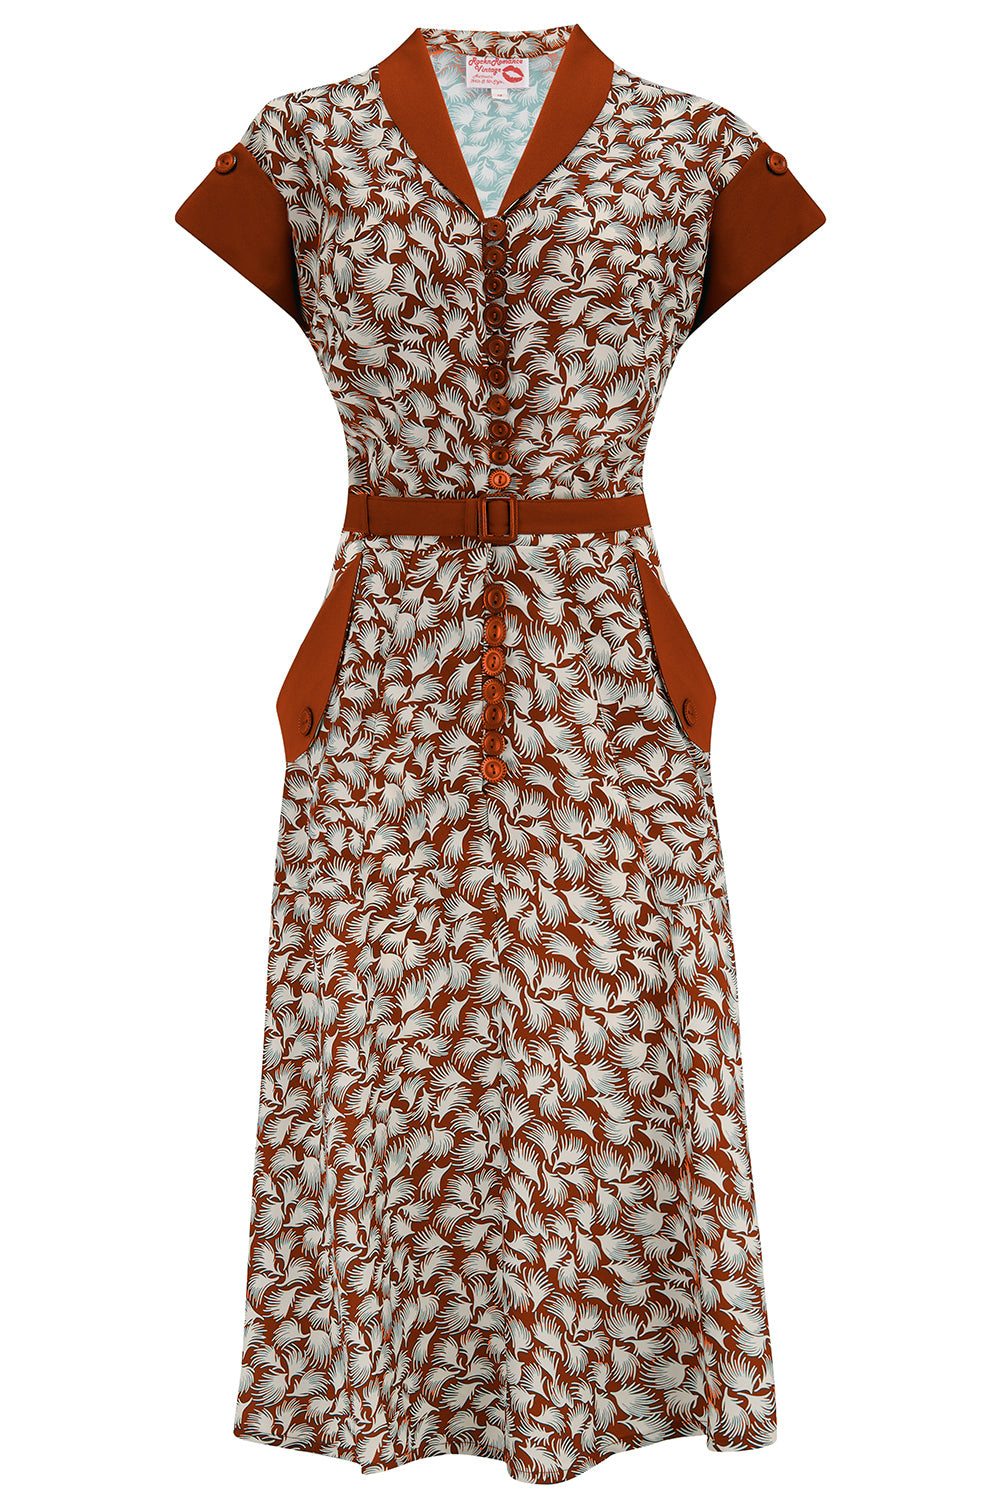 1950s Clothing & Fashion for Women The Casey Dress in Cinnamon Whisp Print True  Authentic 1950s Vintage Style £49.95 AT vintagedancer.com